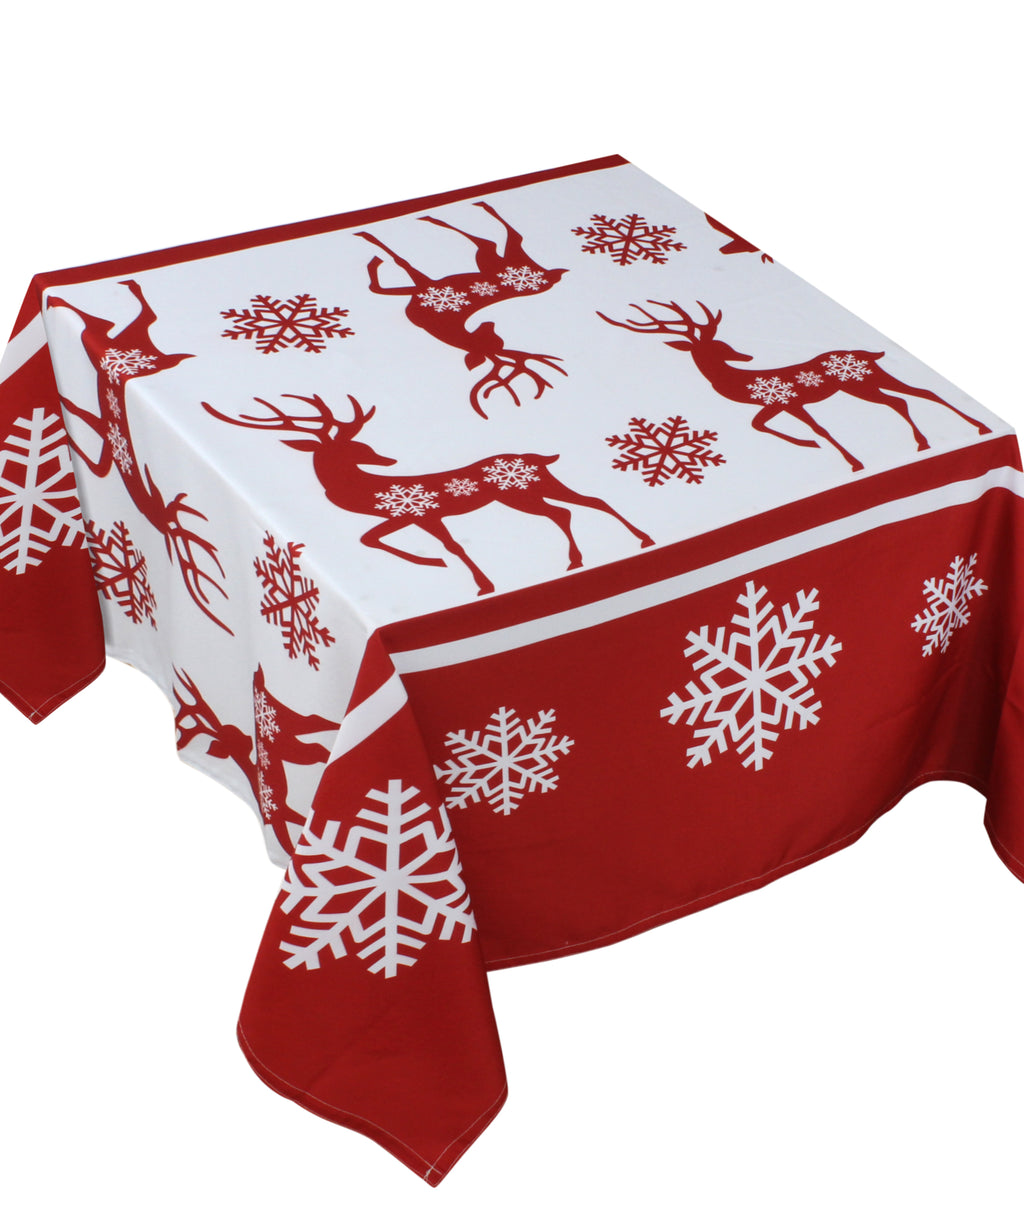 The Red Reindeers table cover